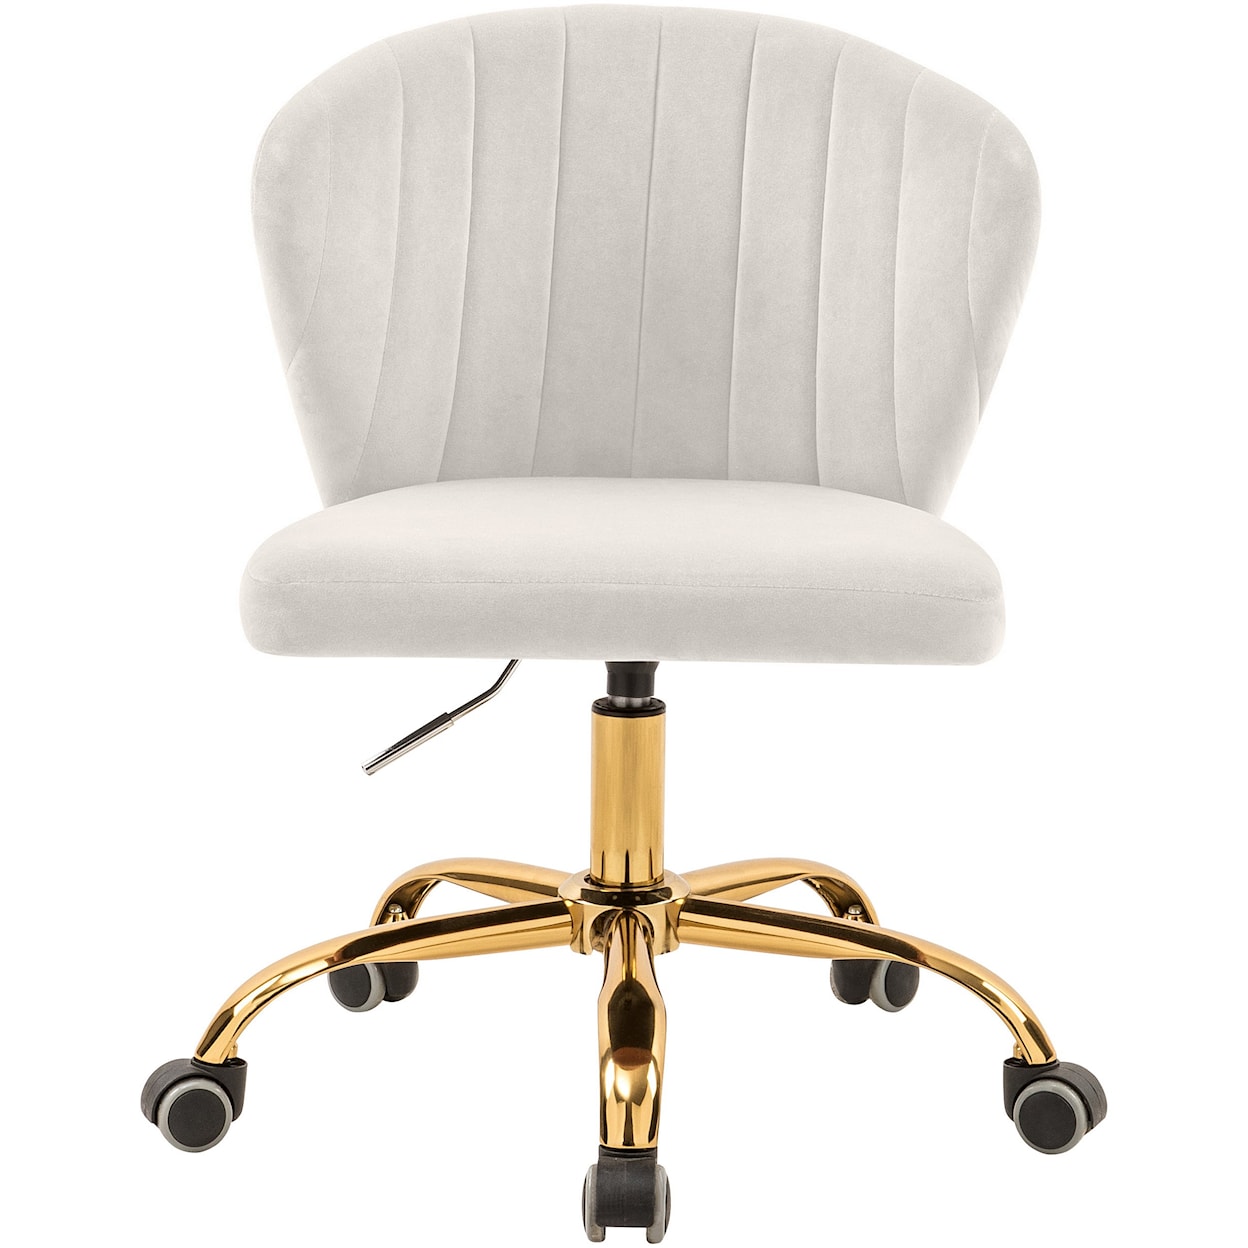 Meridian Furniture Finley Cream Velvet Office Chair with Gold Base